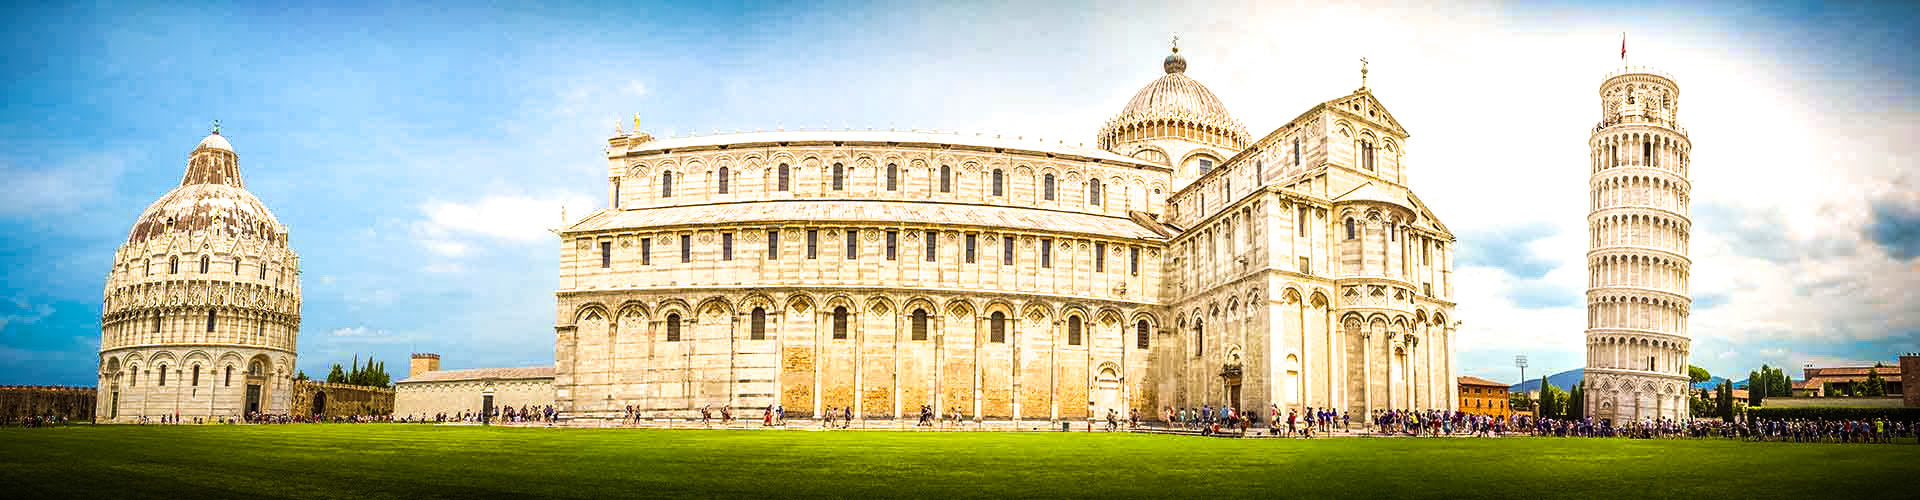 Pisa - beautiful places in Italy